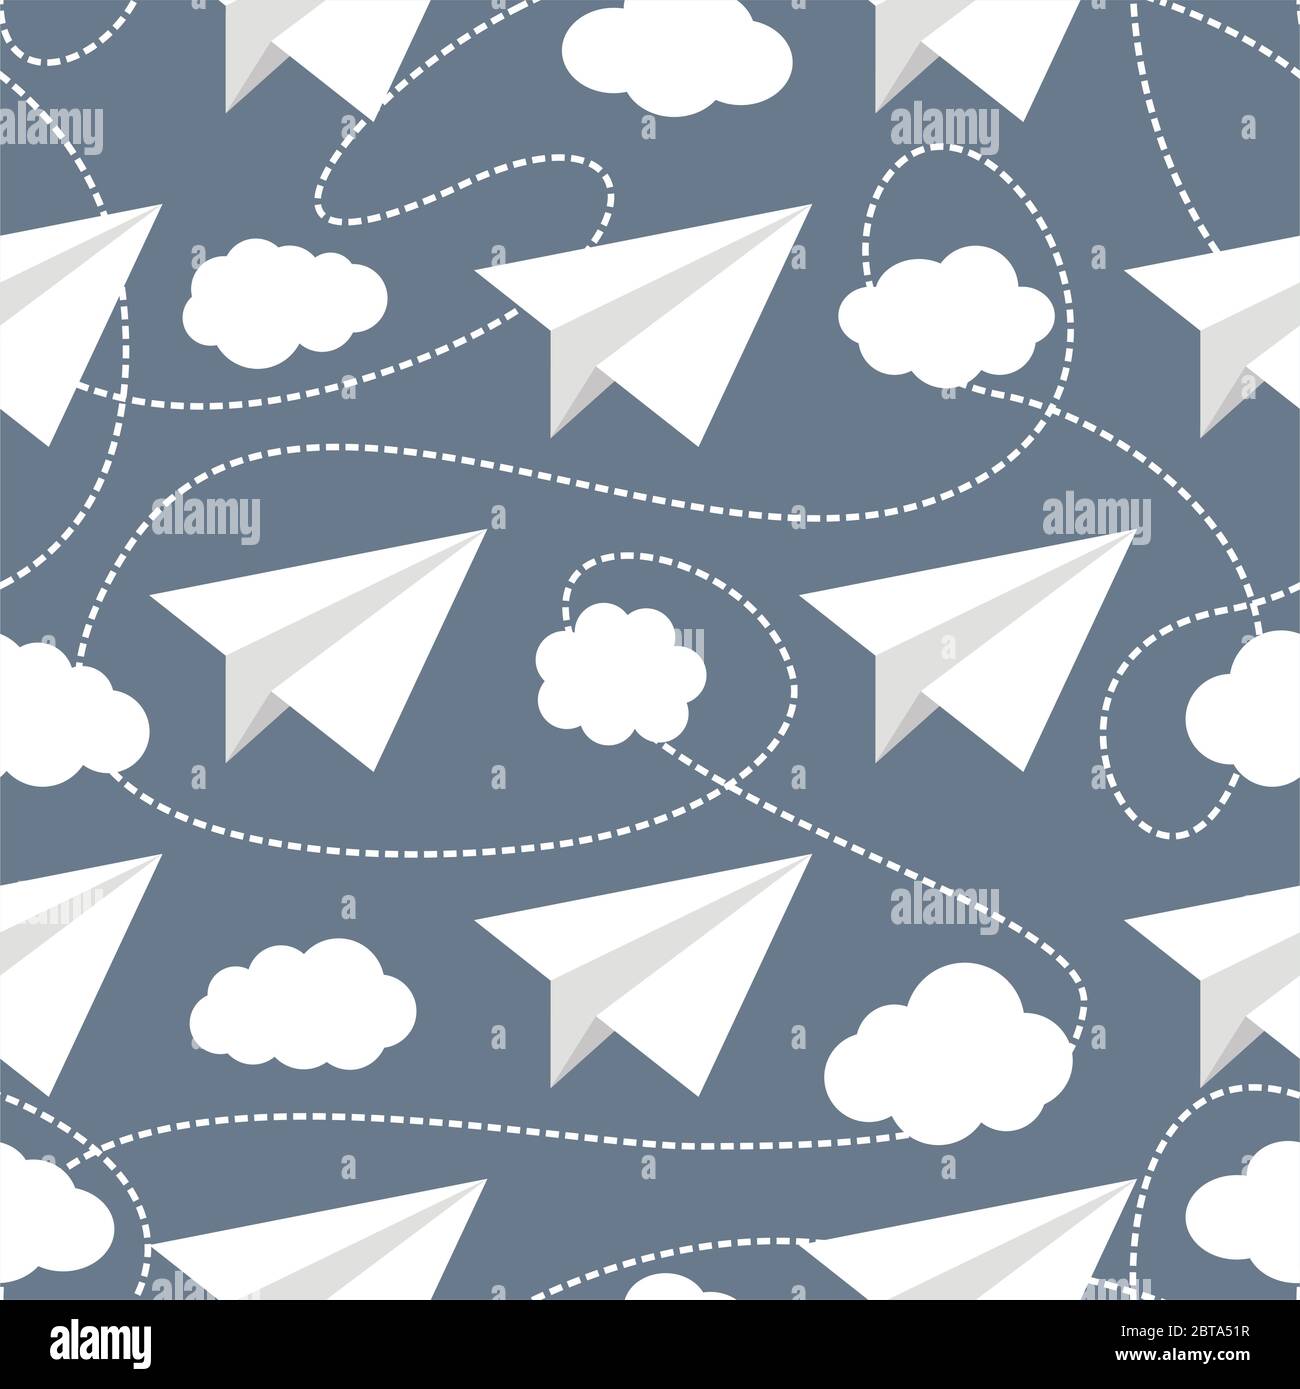 Paper planes seamless vector pattern. Repeating abstract background with paper planes. Papercraft airplanes texture. Paper planes flying in clouds. Stock Vector